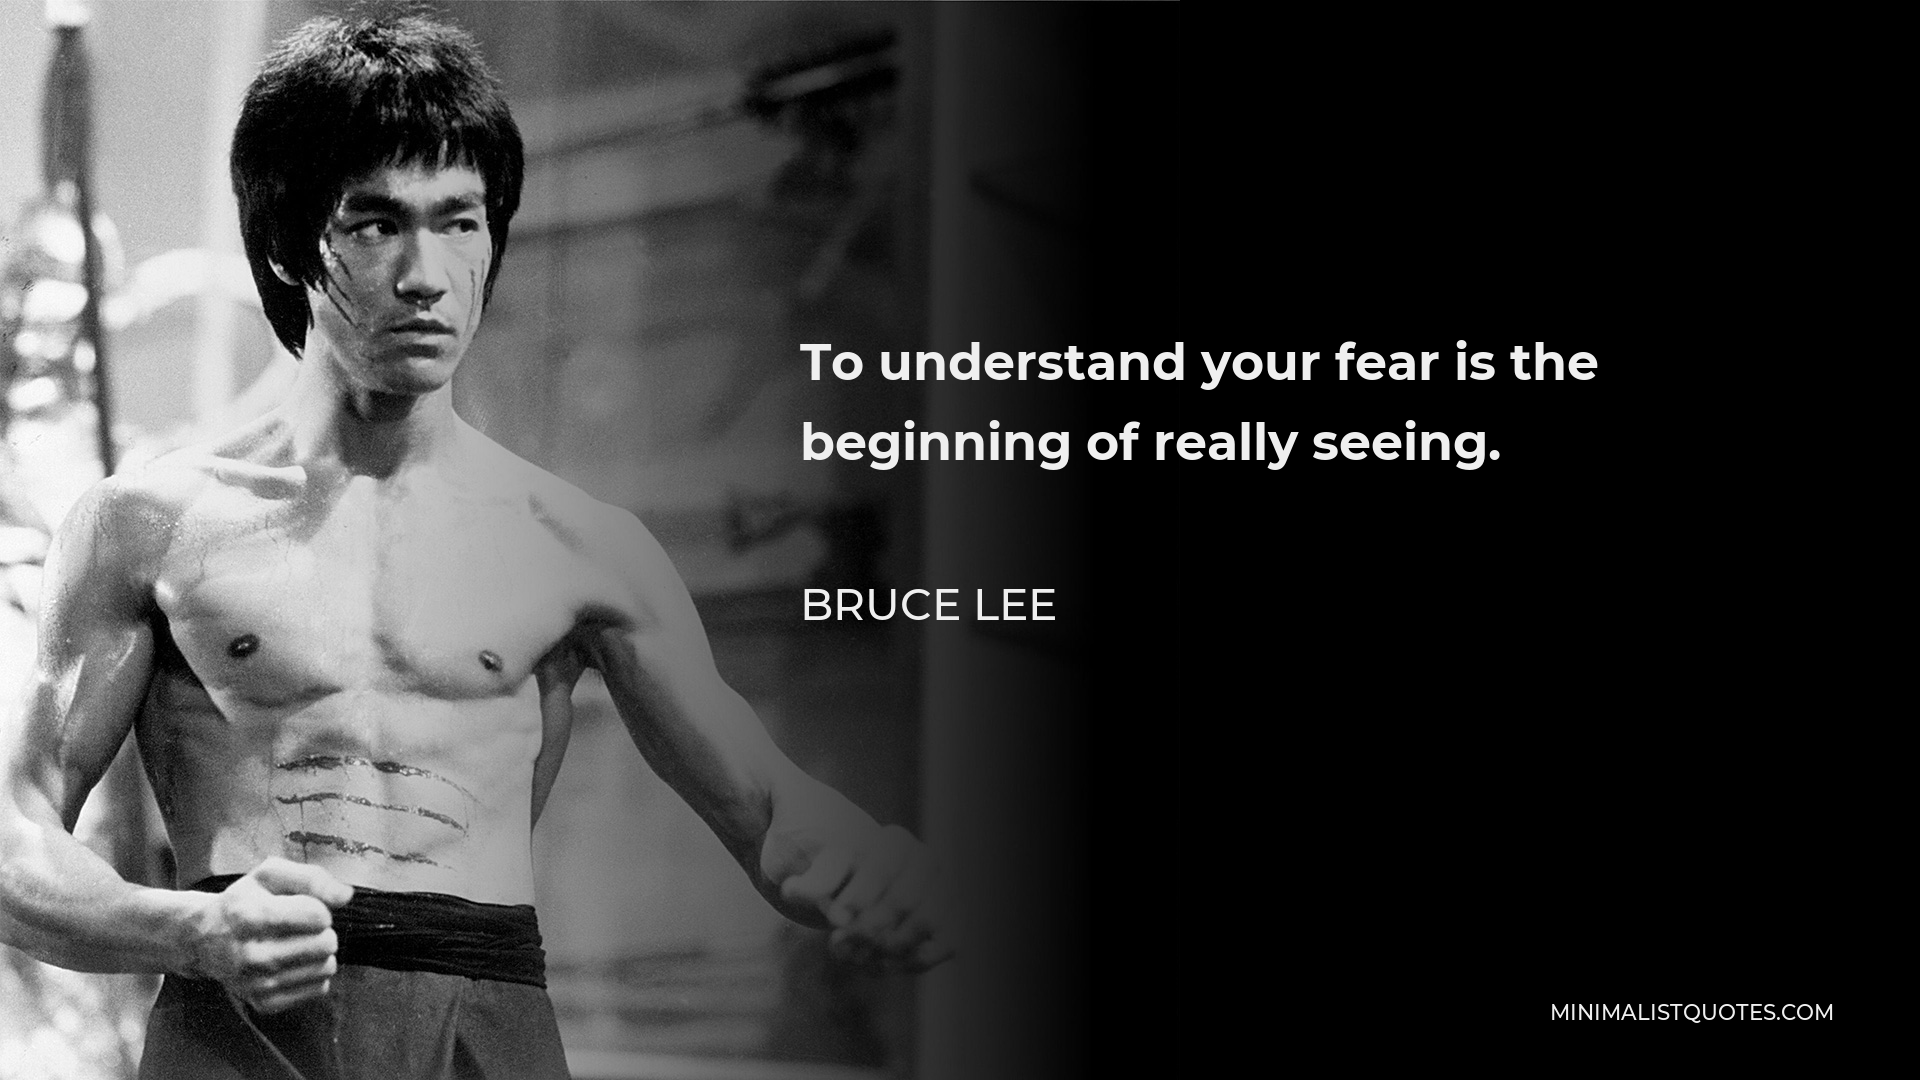 Bruce Lee Quote - To understand your fear is the beginning of really seeing.